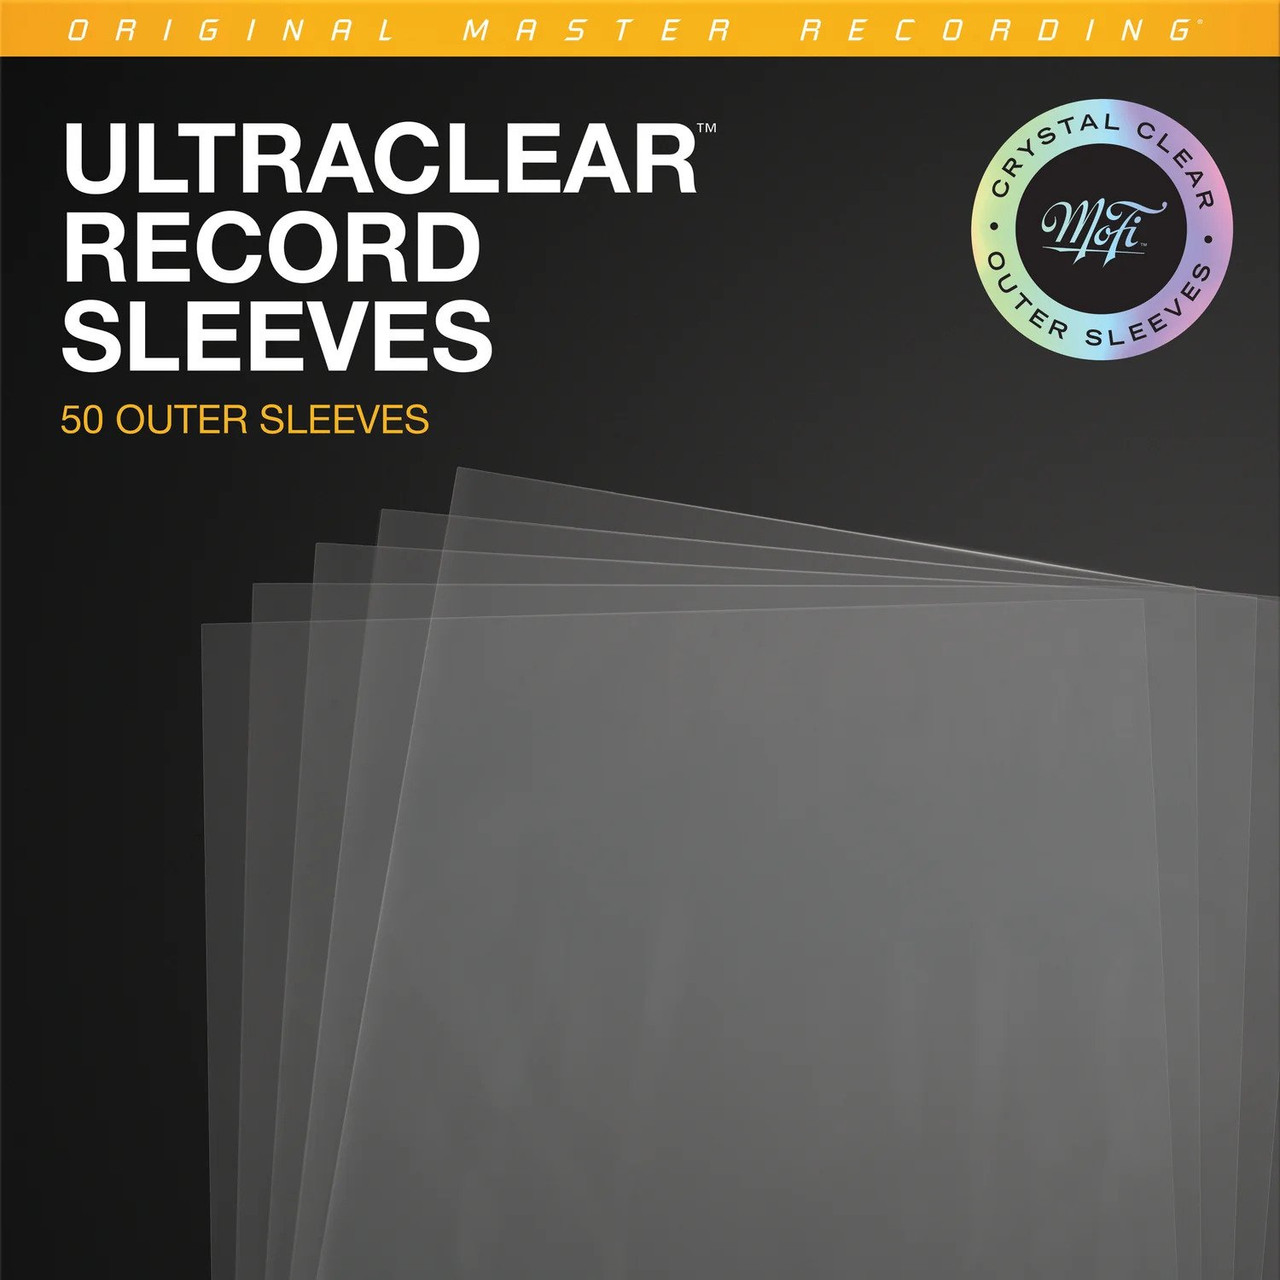 Mofi Archival UltraClear Vinyl Record Outer Plastic Sleeves 50 Pack -  Mobile Fidelity Sound Lab MFSLCOS, EAN 821797777445